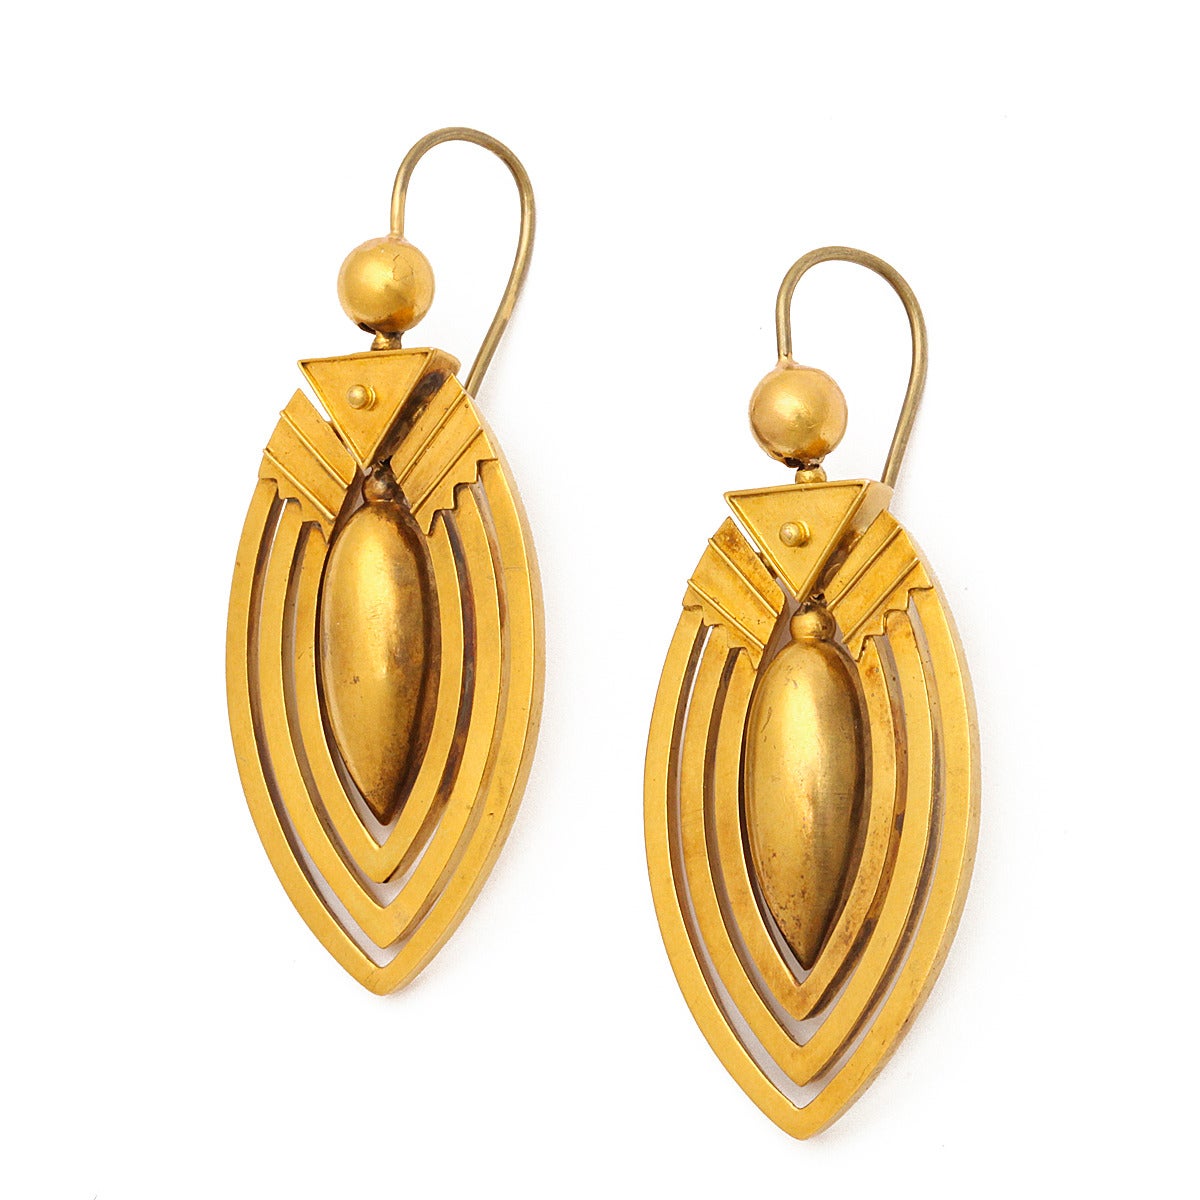 Victorian Roman Revival gold earrings composed of three concentric rings around a center tear drop.

English, ca. 1885
Length: 2 inches